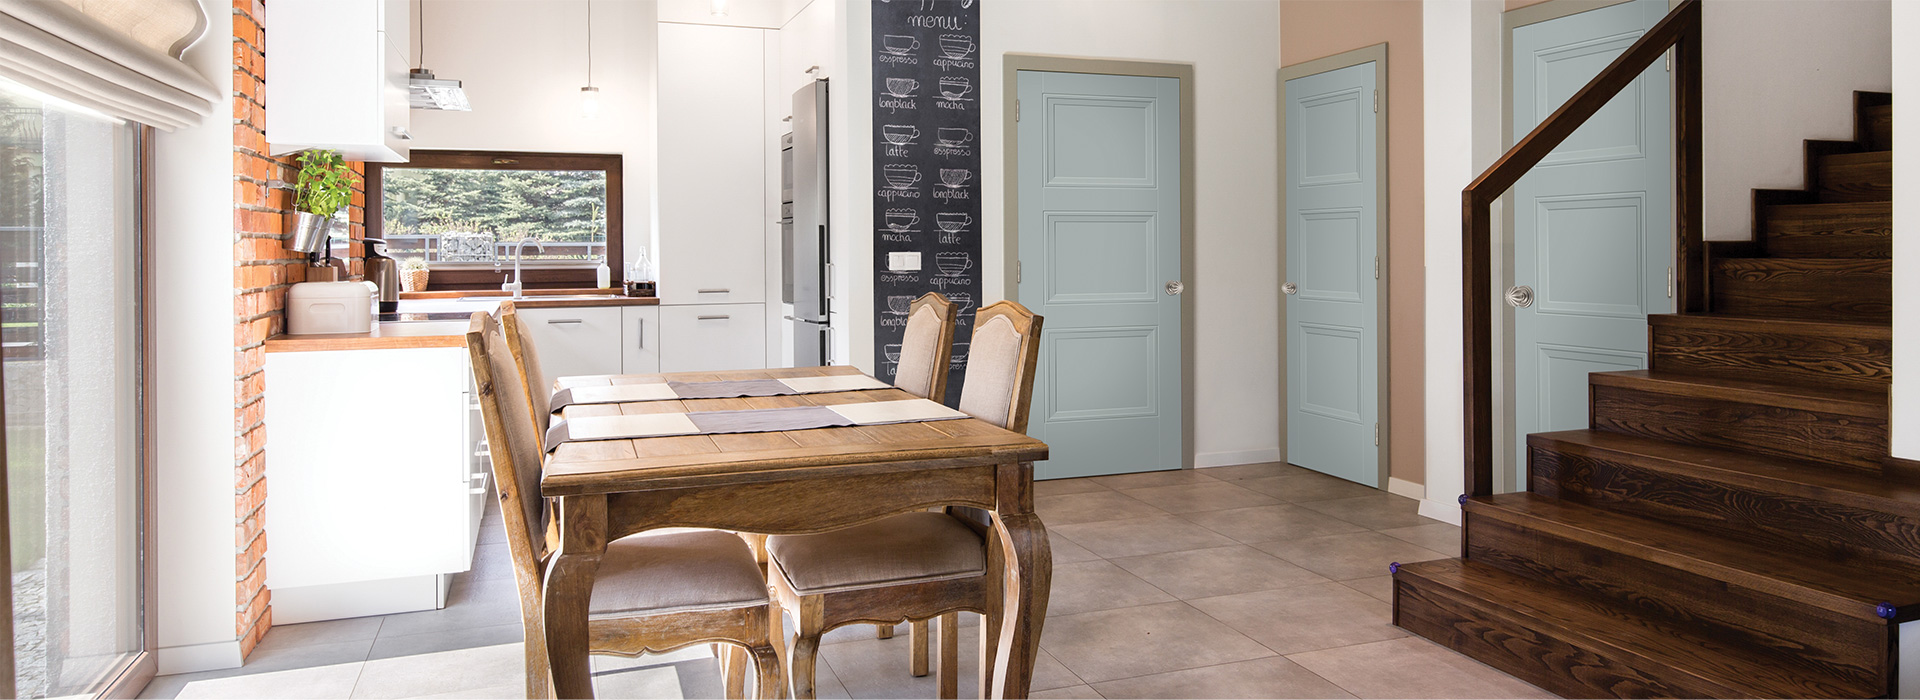 3 interior 3 panel Livingston doors in a modern farmhouse style kitchen with dining table